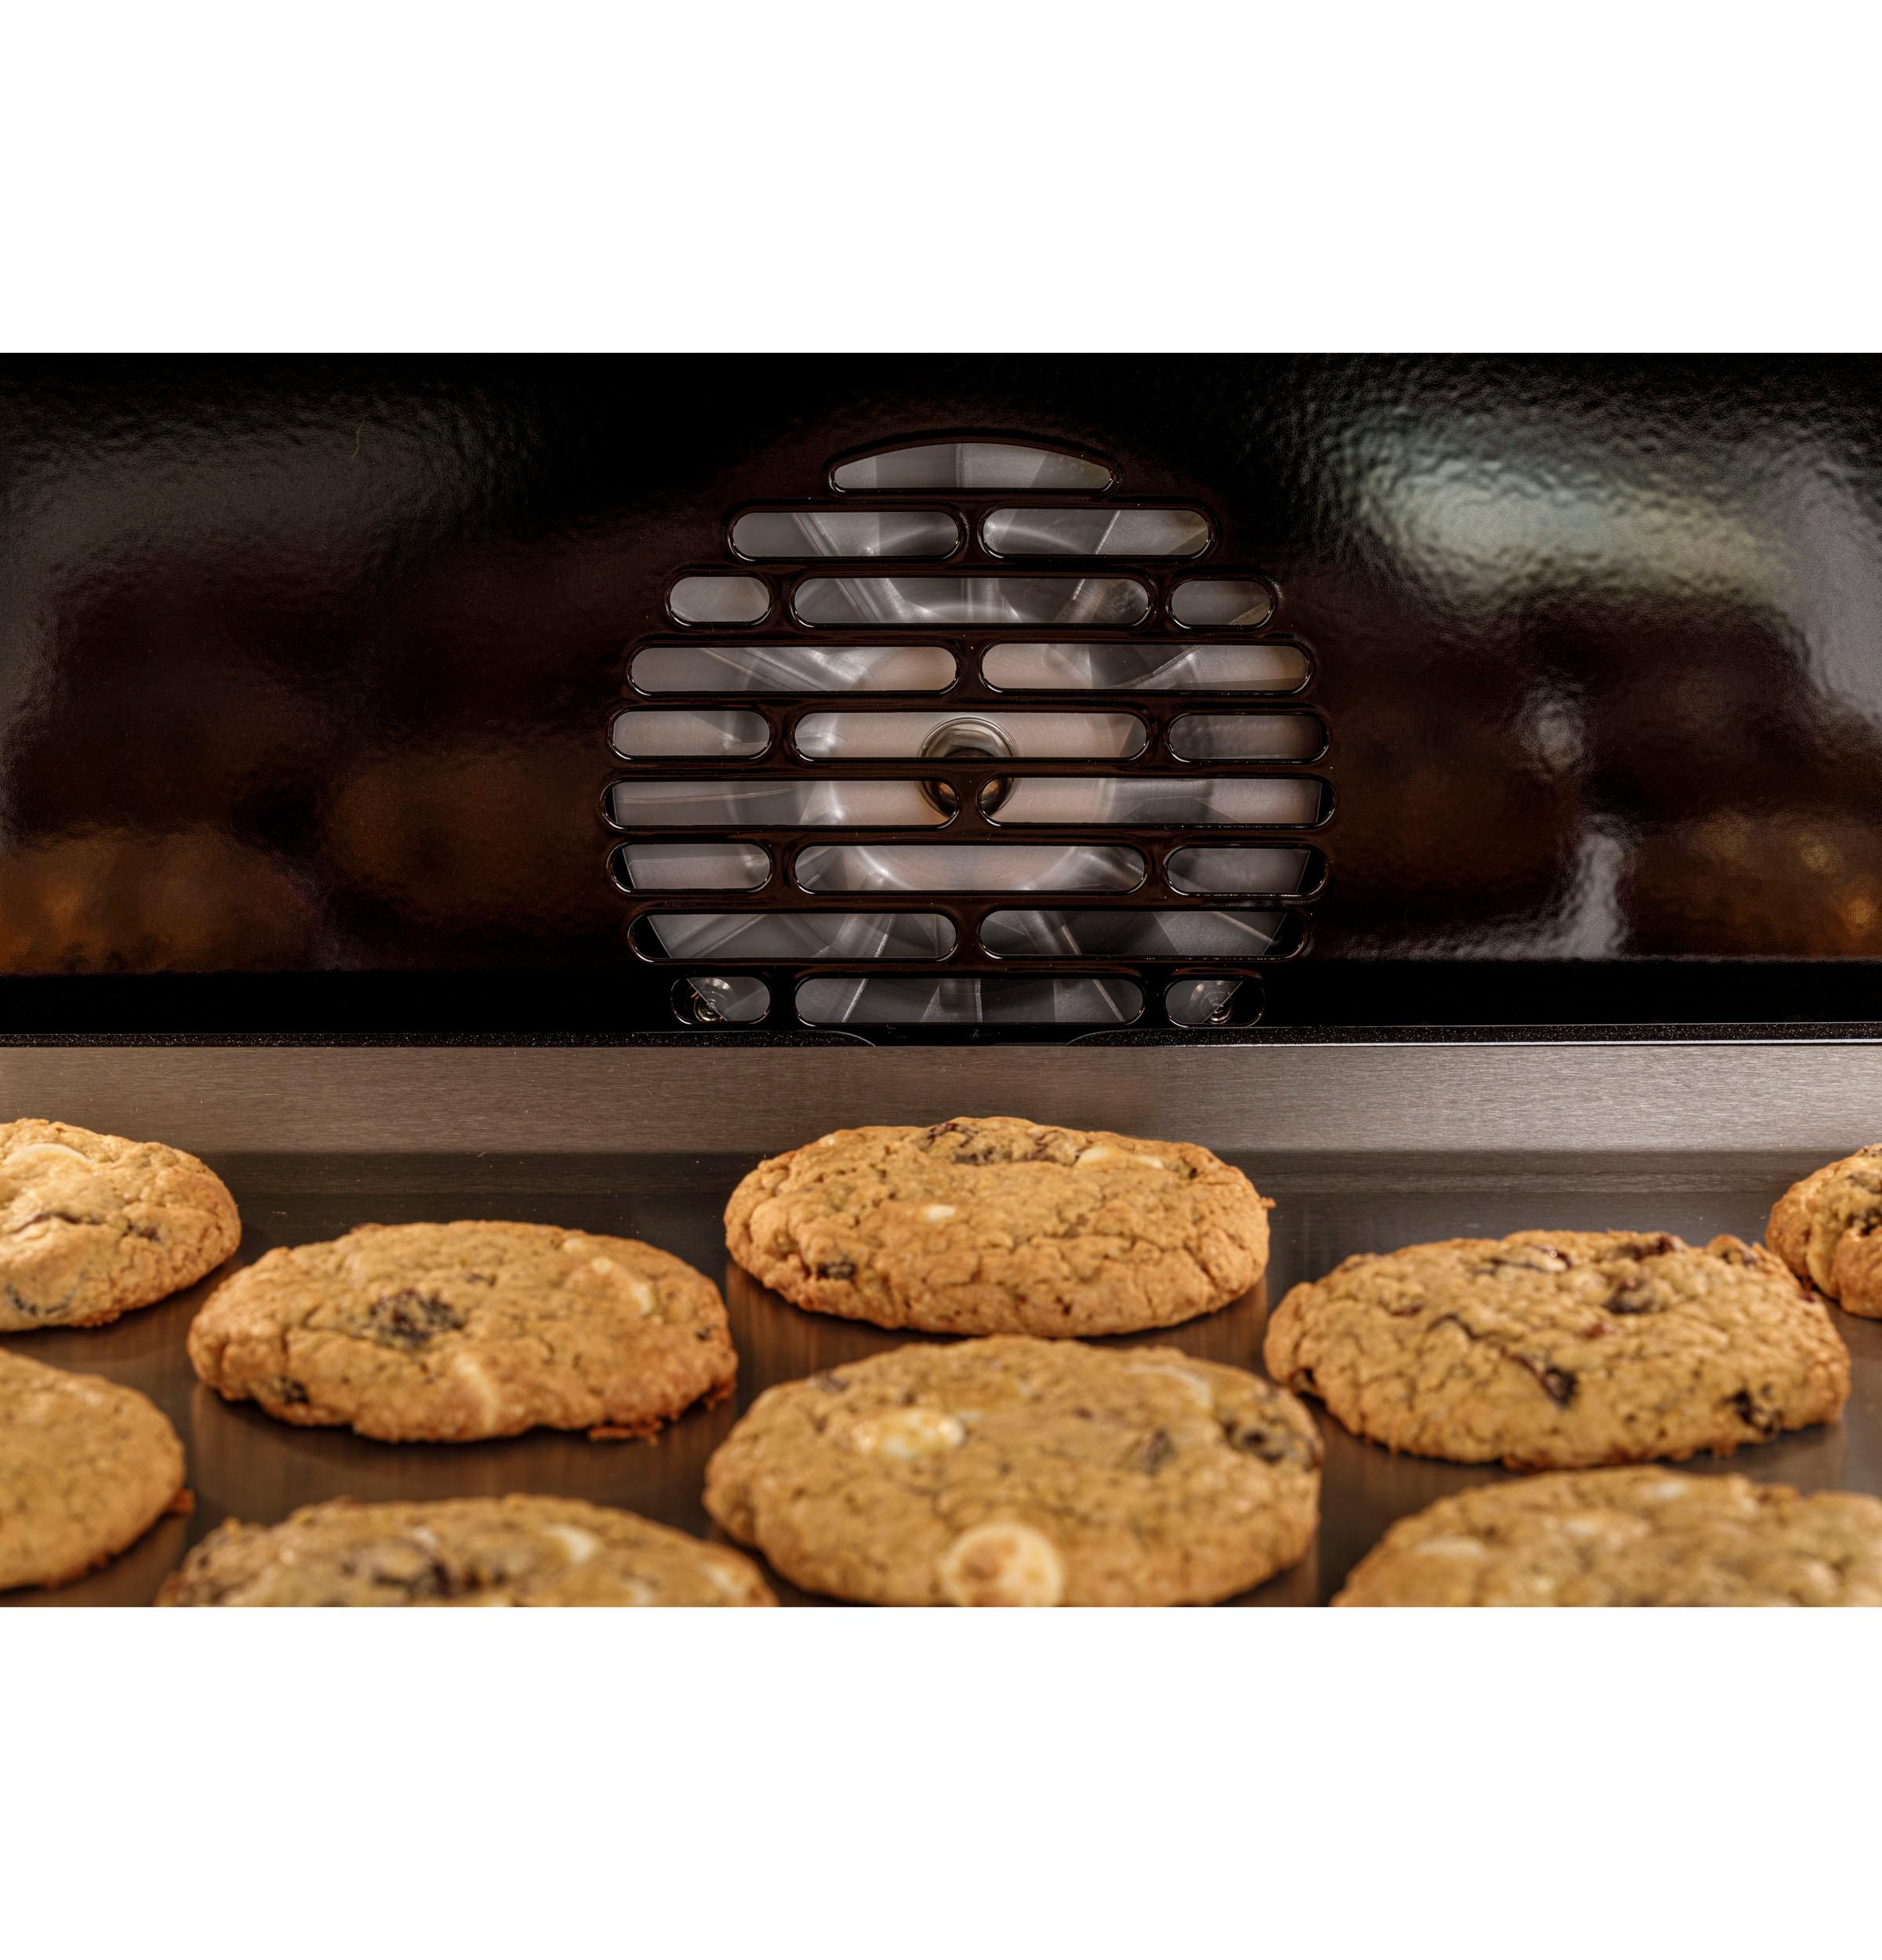 GE Profile™ 30" Smart Built-In Twin Flex Convection Wall Oven